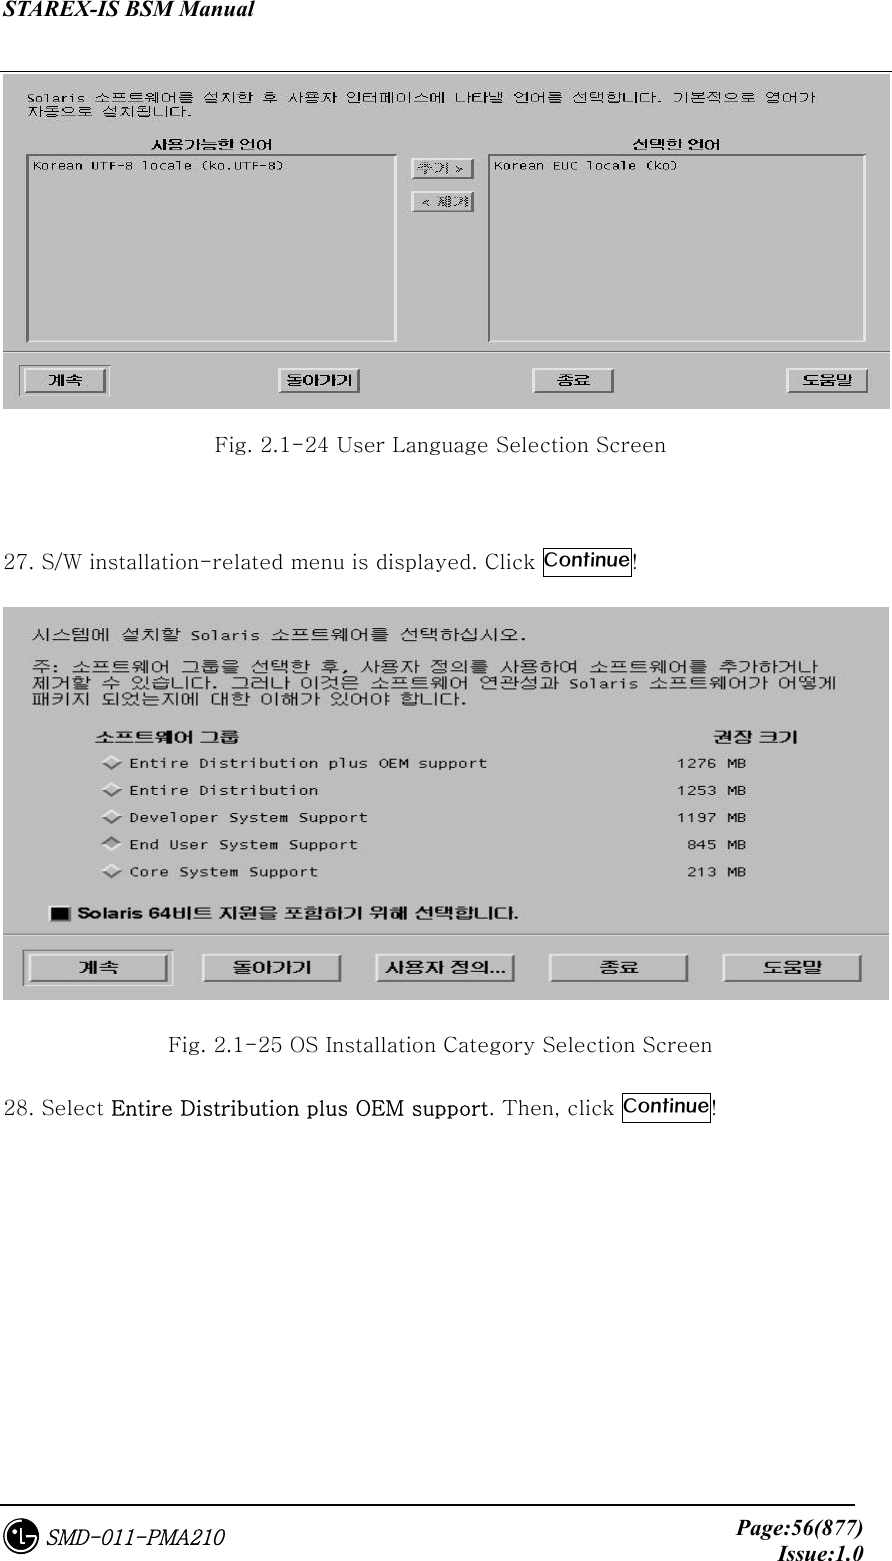 STAREX-IS BSM Manual     Page:56(877)Issue:1.0SMD-011-PMA210  Fig. 2.1-24 User Language Selection Screen  27. S/W installation-related menu is displayed. Click Continue!  Fig. 2.1-25 OS Installation Category Selection Screen   28. Select Entire Distribution plus OEM support. Then, click Continue!  